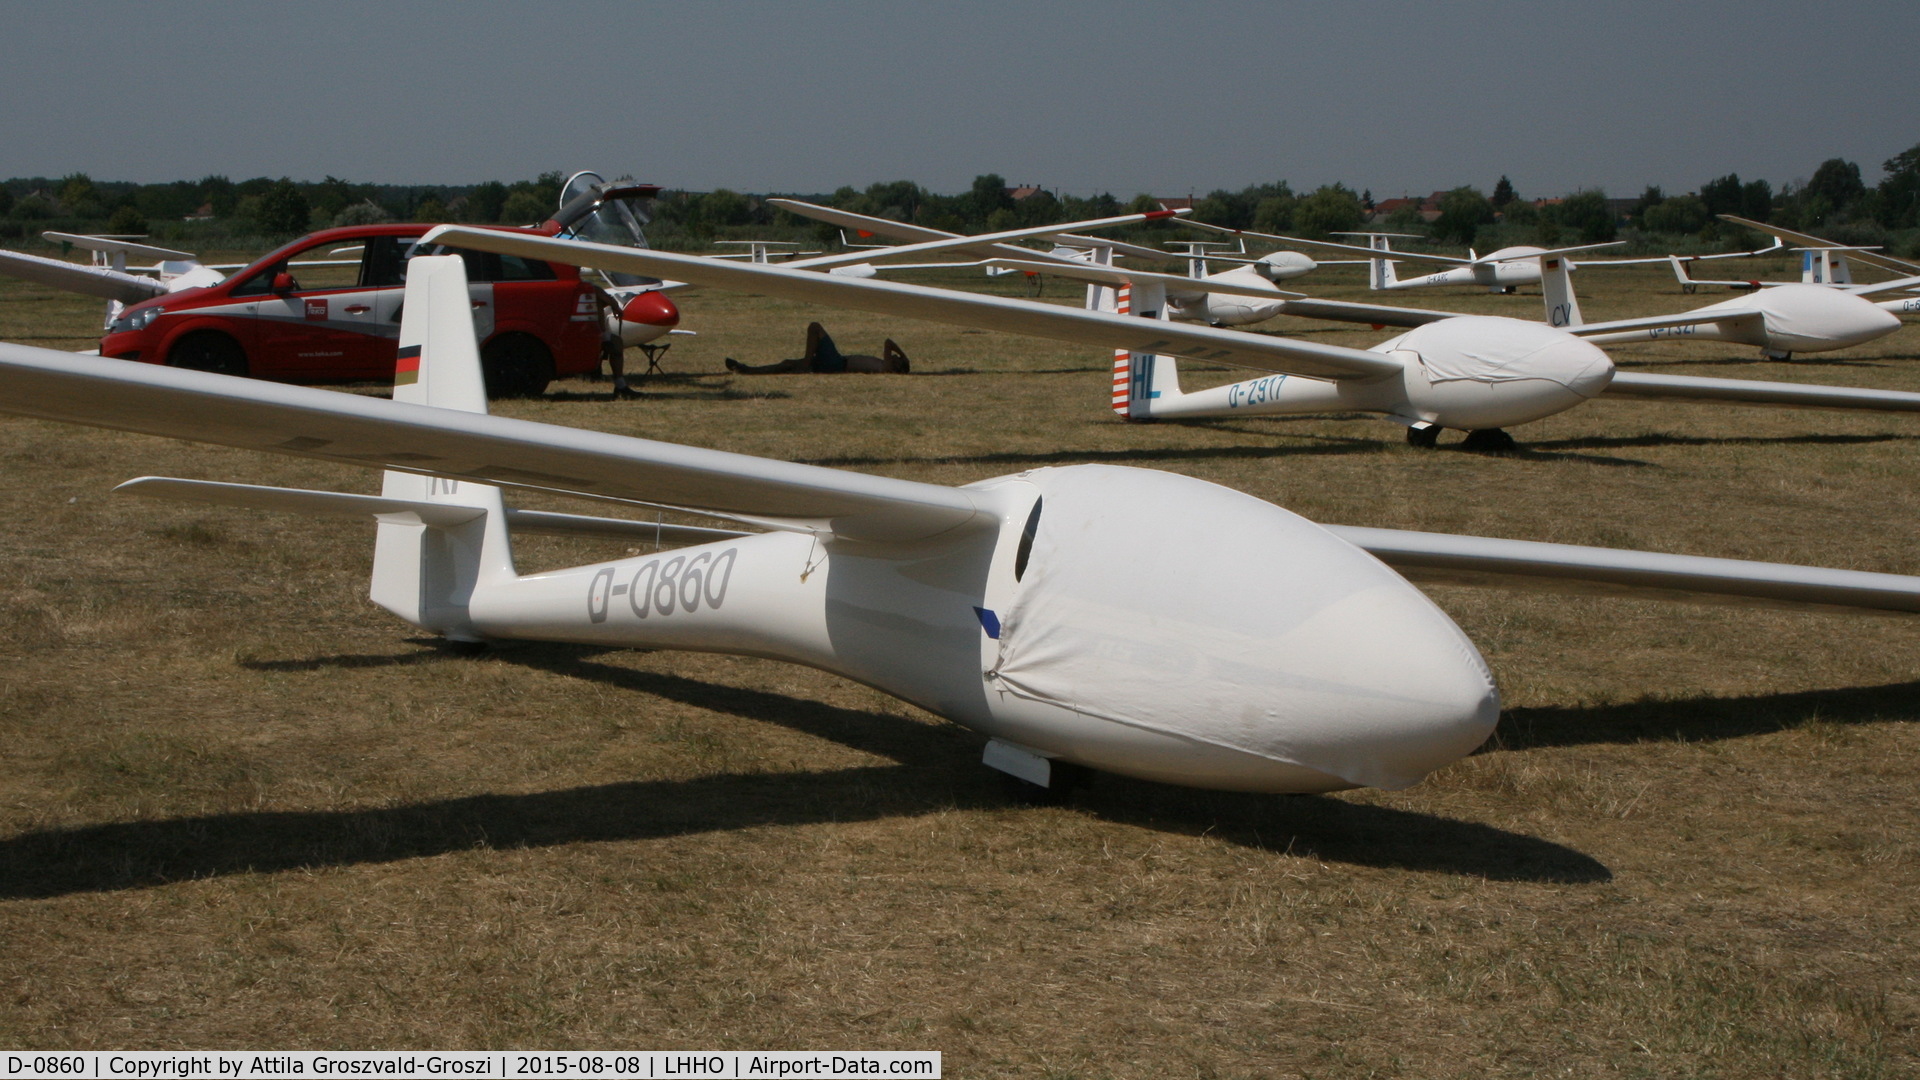 D-0860, 1971 Schleicher ASW-15 C/N 15177, Hajdúszoboszló Airport, Hungary - 60. Hungary Gliding National Championship and third Civis Thermal Cup, 2015